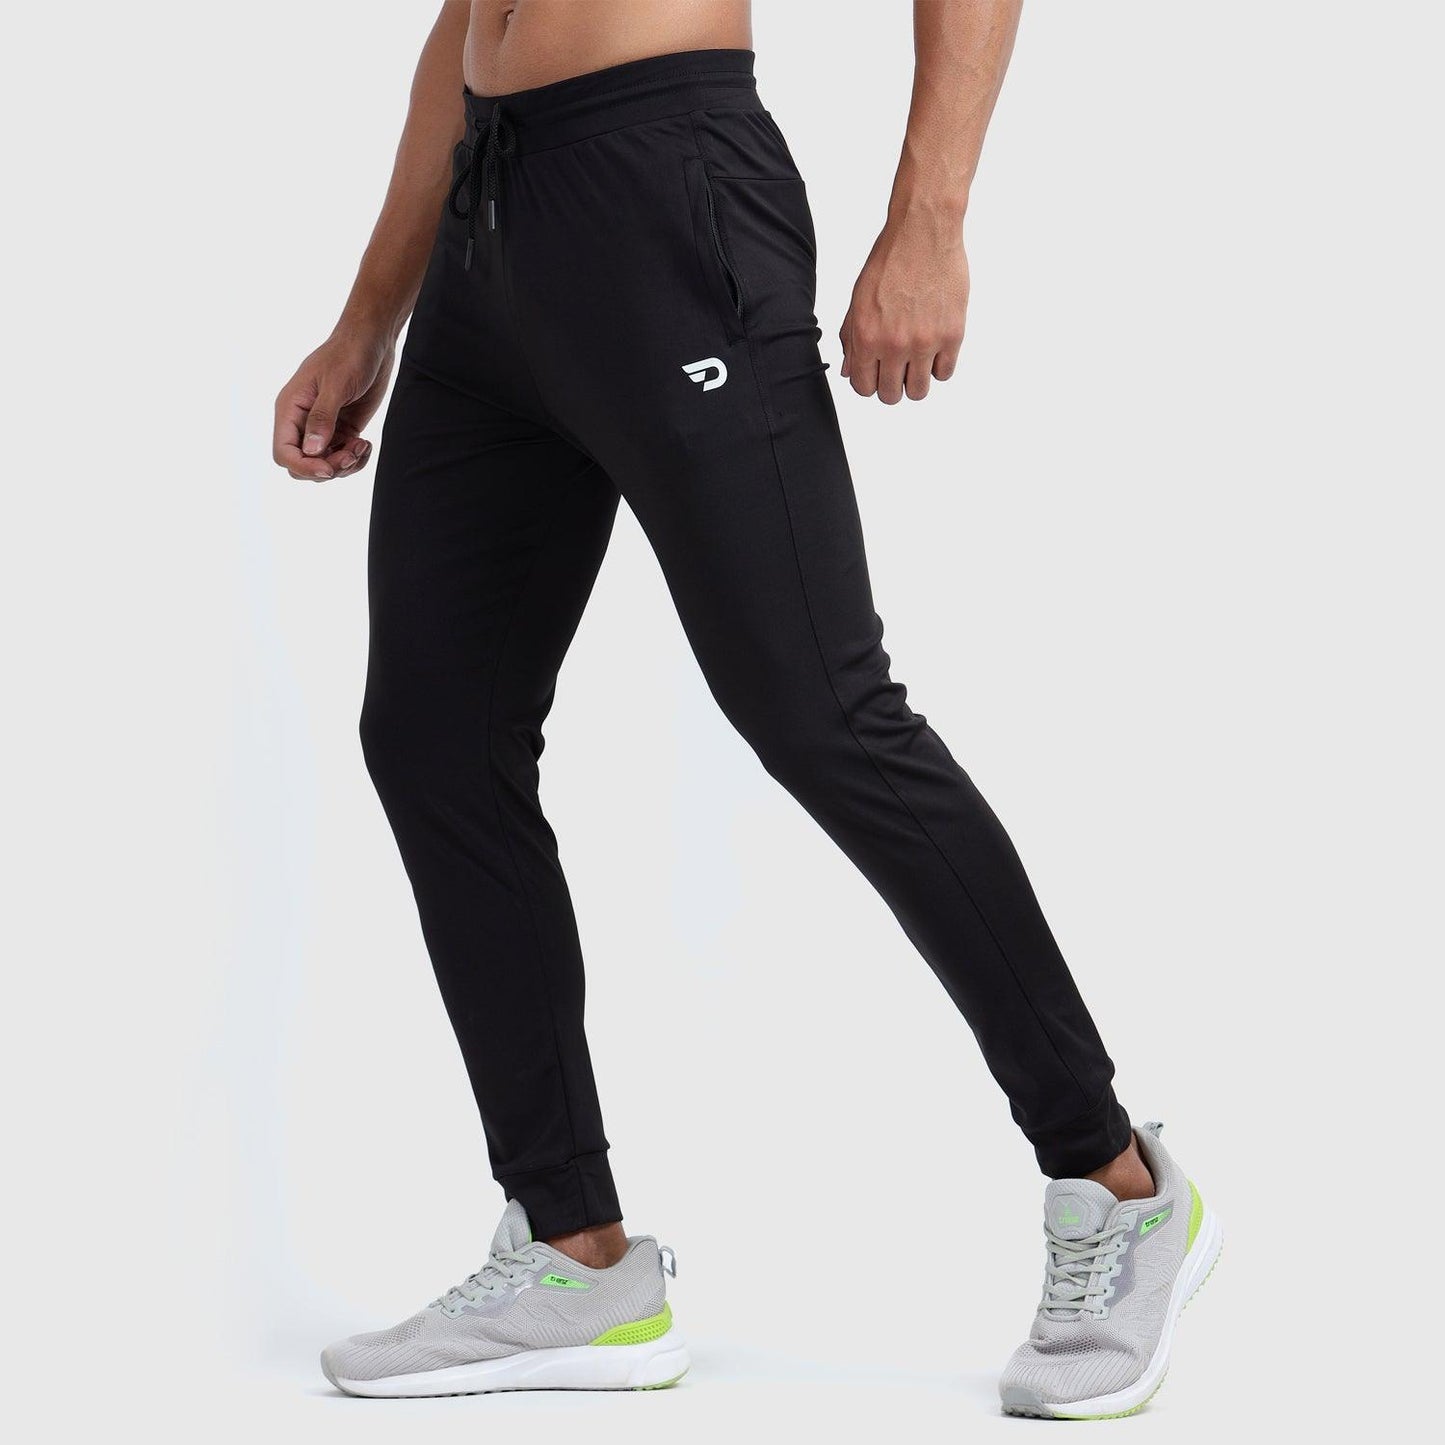 Denmonk: Elevate your look with these Power joggers sharp black joggers for mens.